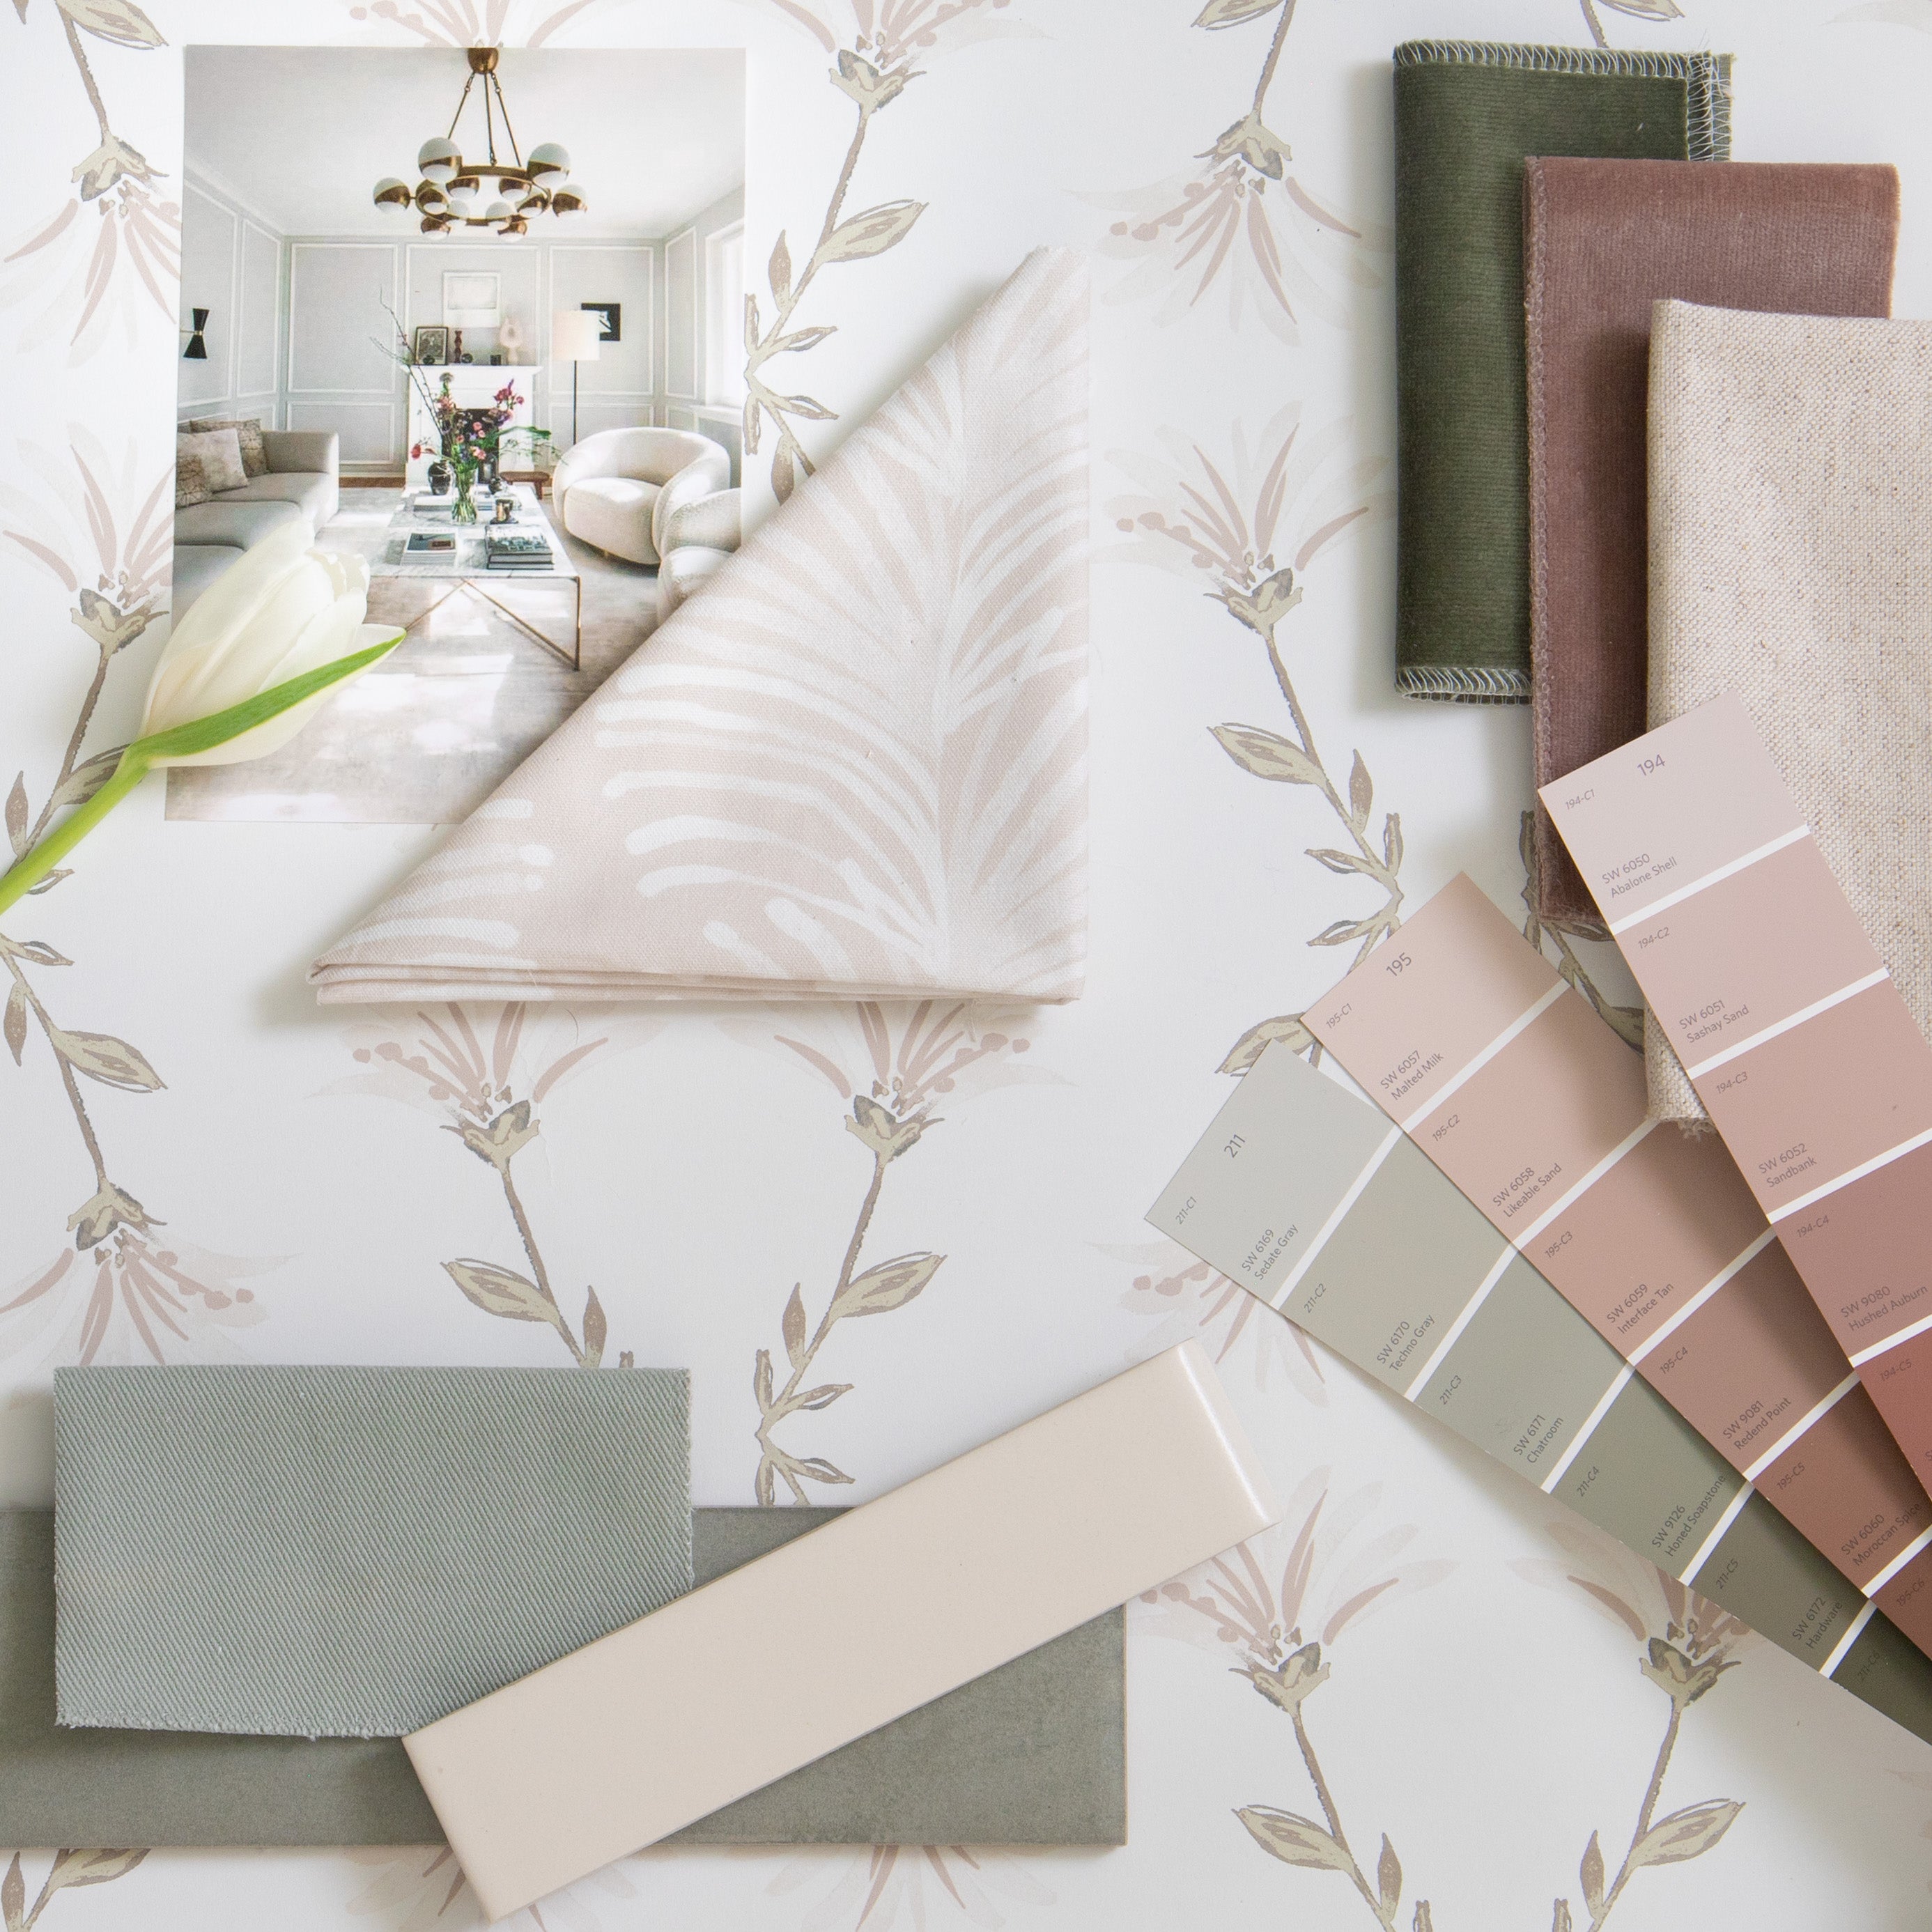 Interior design moodboard and fabric inspirations with Beige Botanical Stripe Printed Swatch, Fern Green Velvet Swatch, Mauve Velvet Swatch and Cream Floral Wallpaper